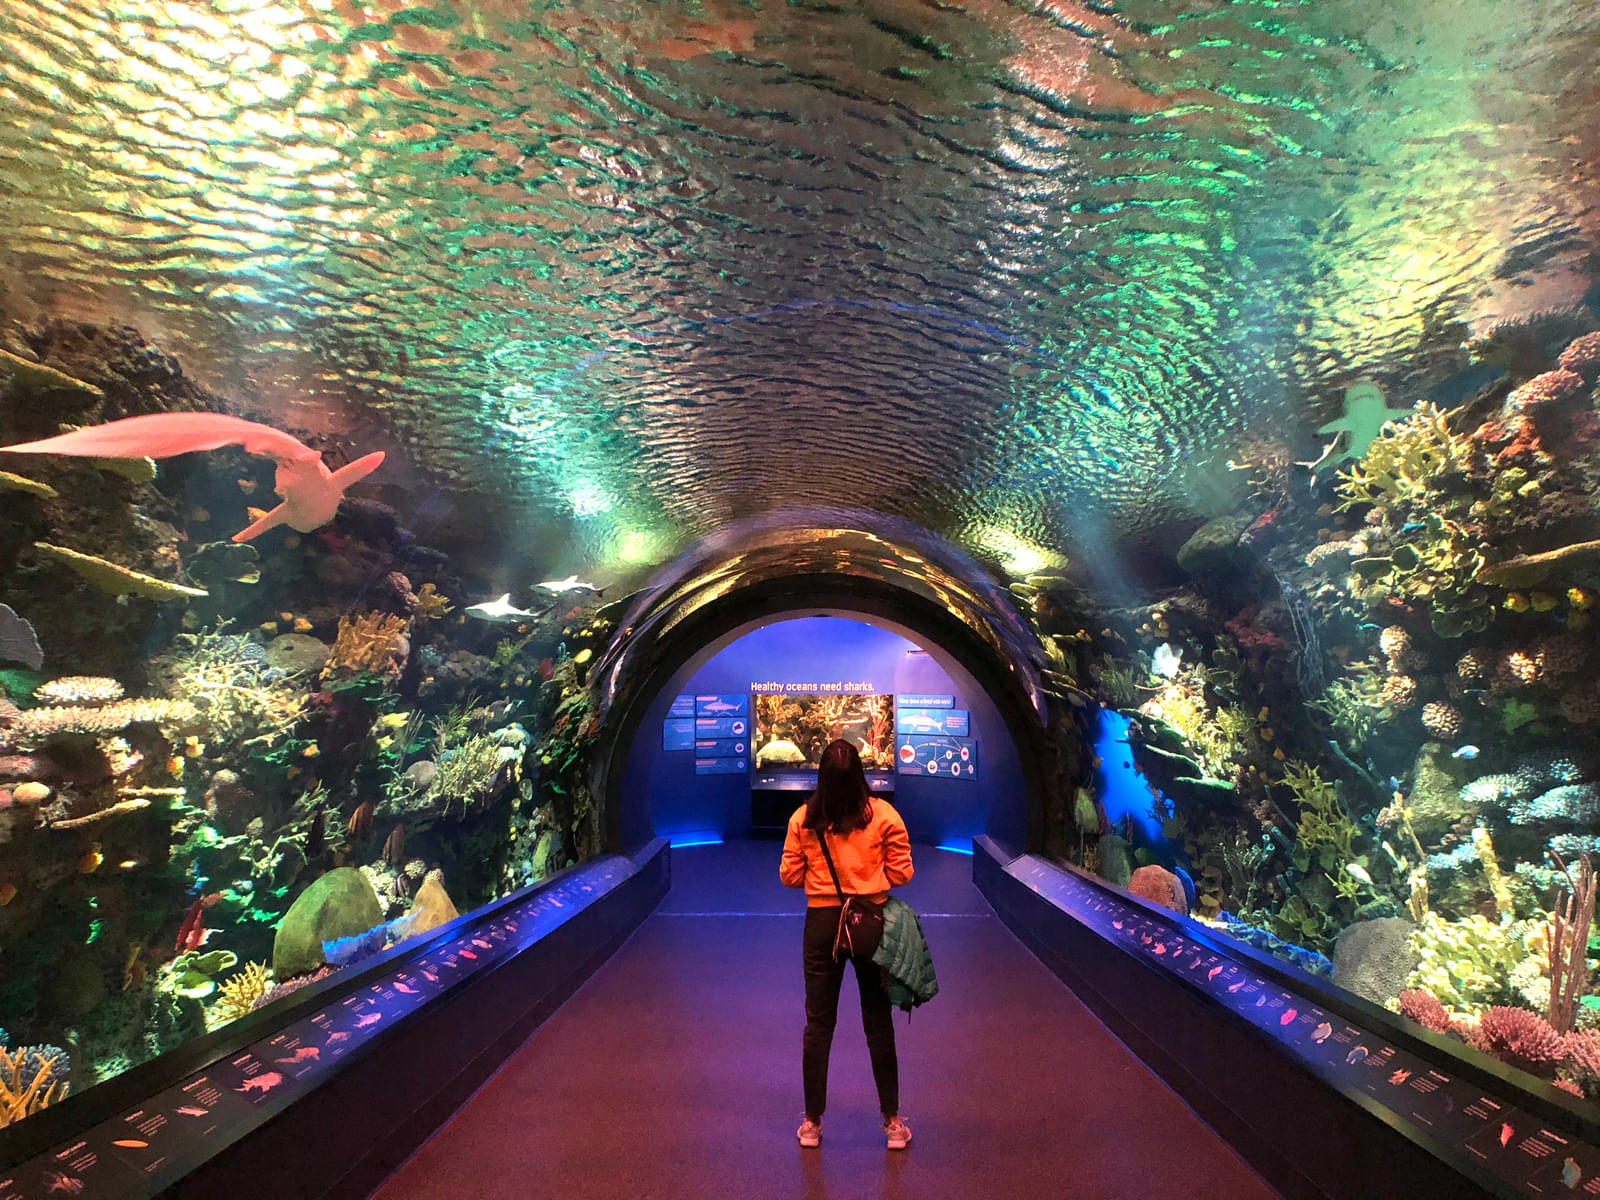 Visit New York Aquarium and be mesmerised by the rich and diverse marine life found in the ocean.